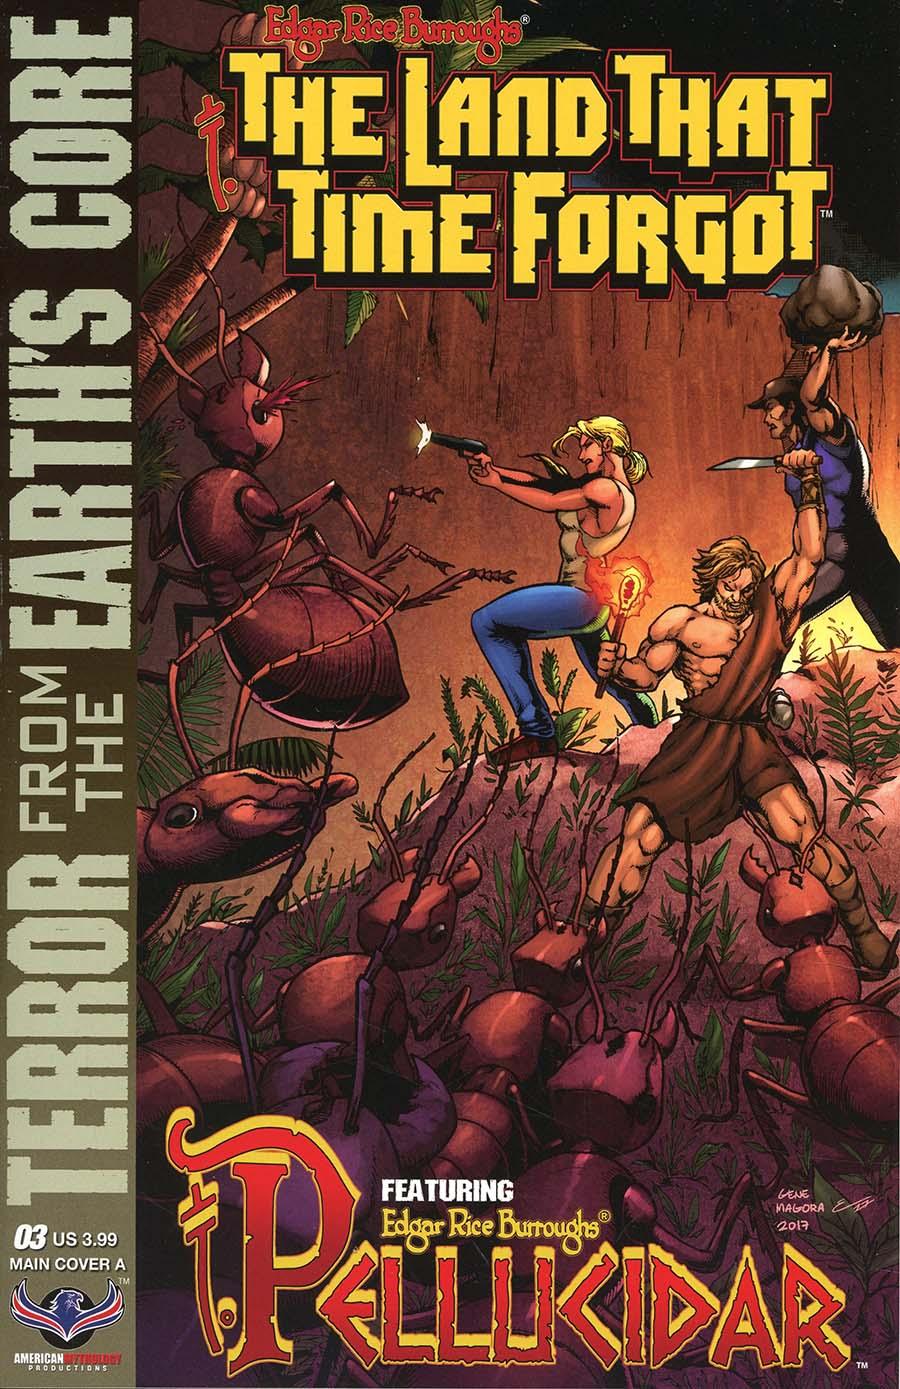 Edgar Rice Burroughs Land That Time Forgot Terror From The Earths Core Vol. 1 #3